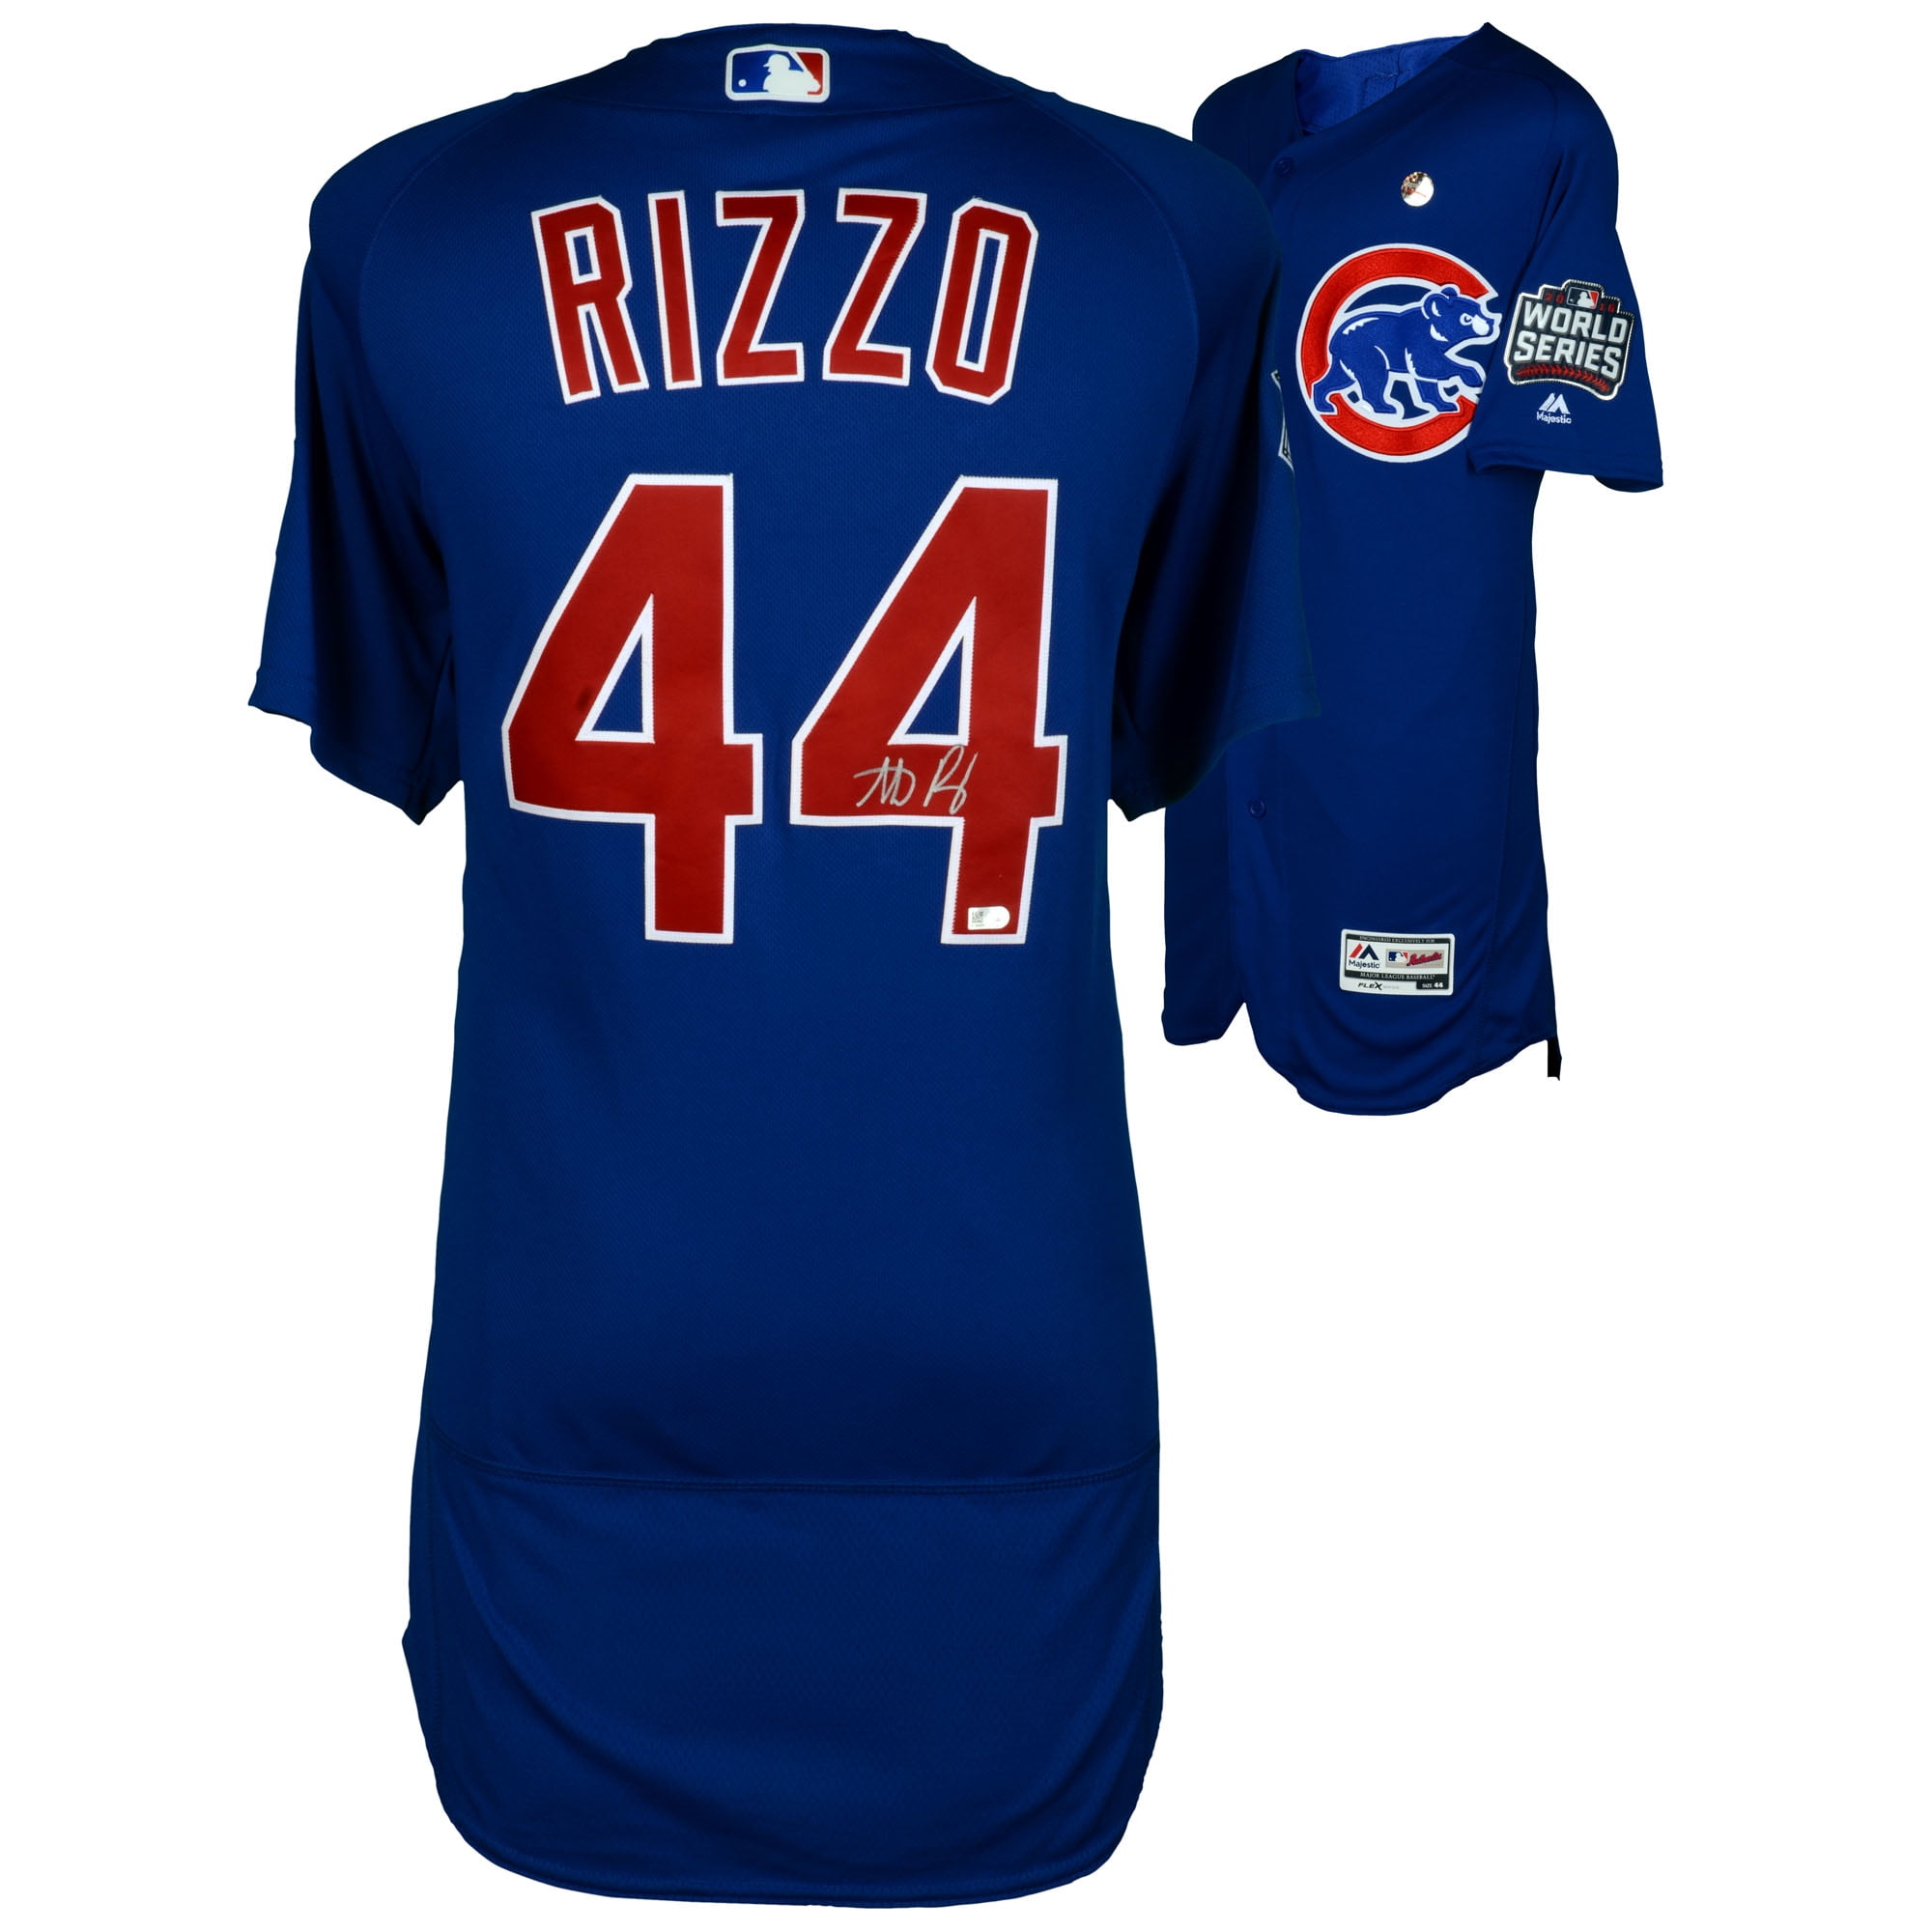 rizzo cubs world series jersey